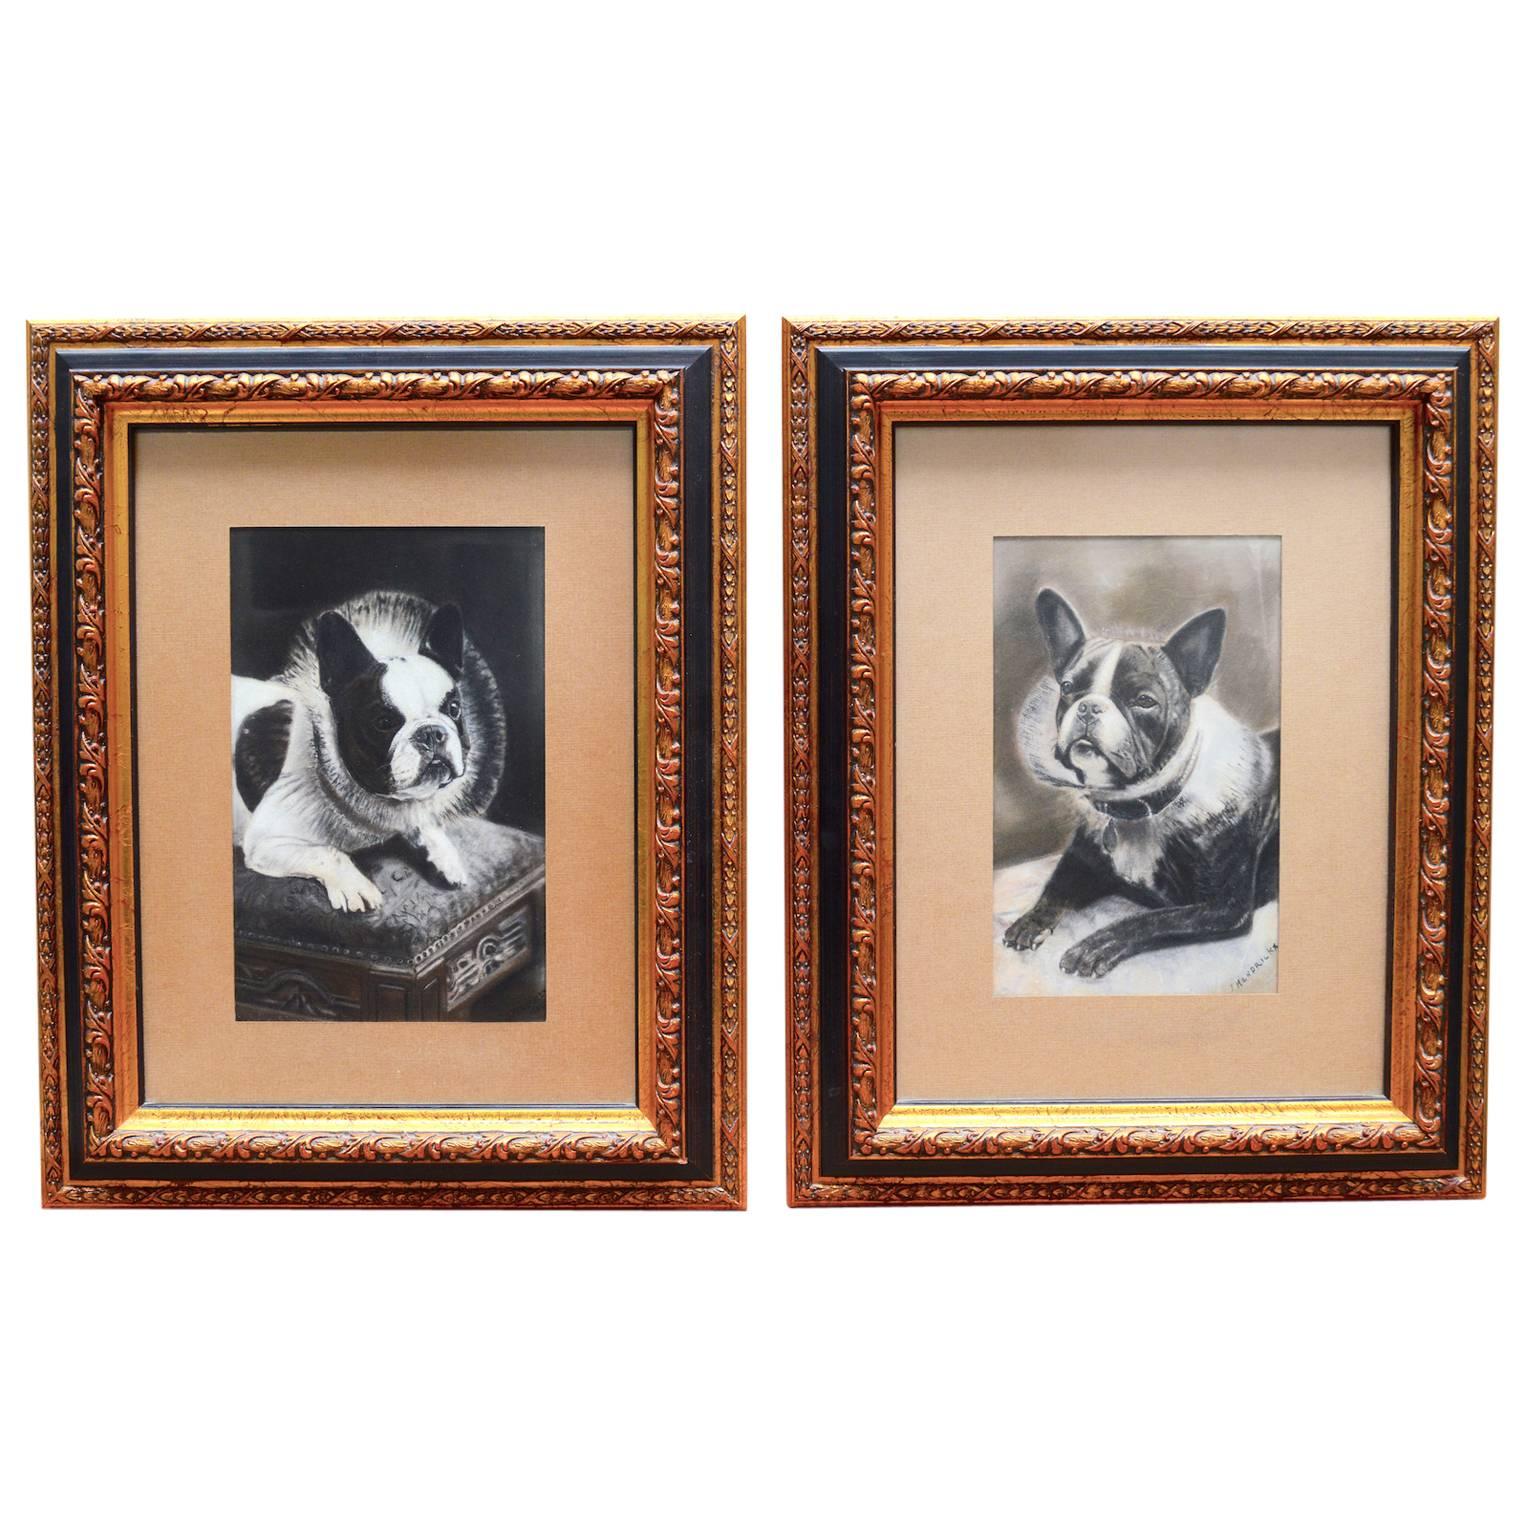 Pair of Grisaille Drawings on Paper of French Bulldogs